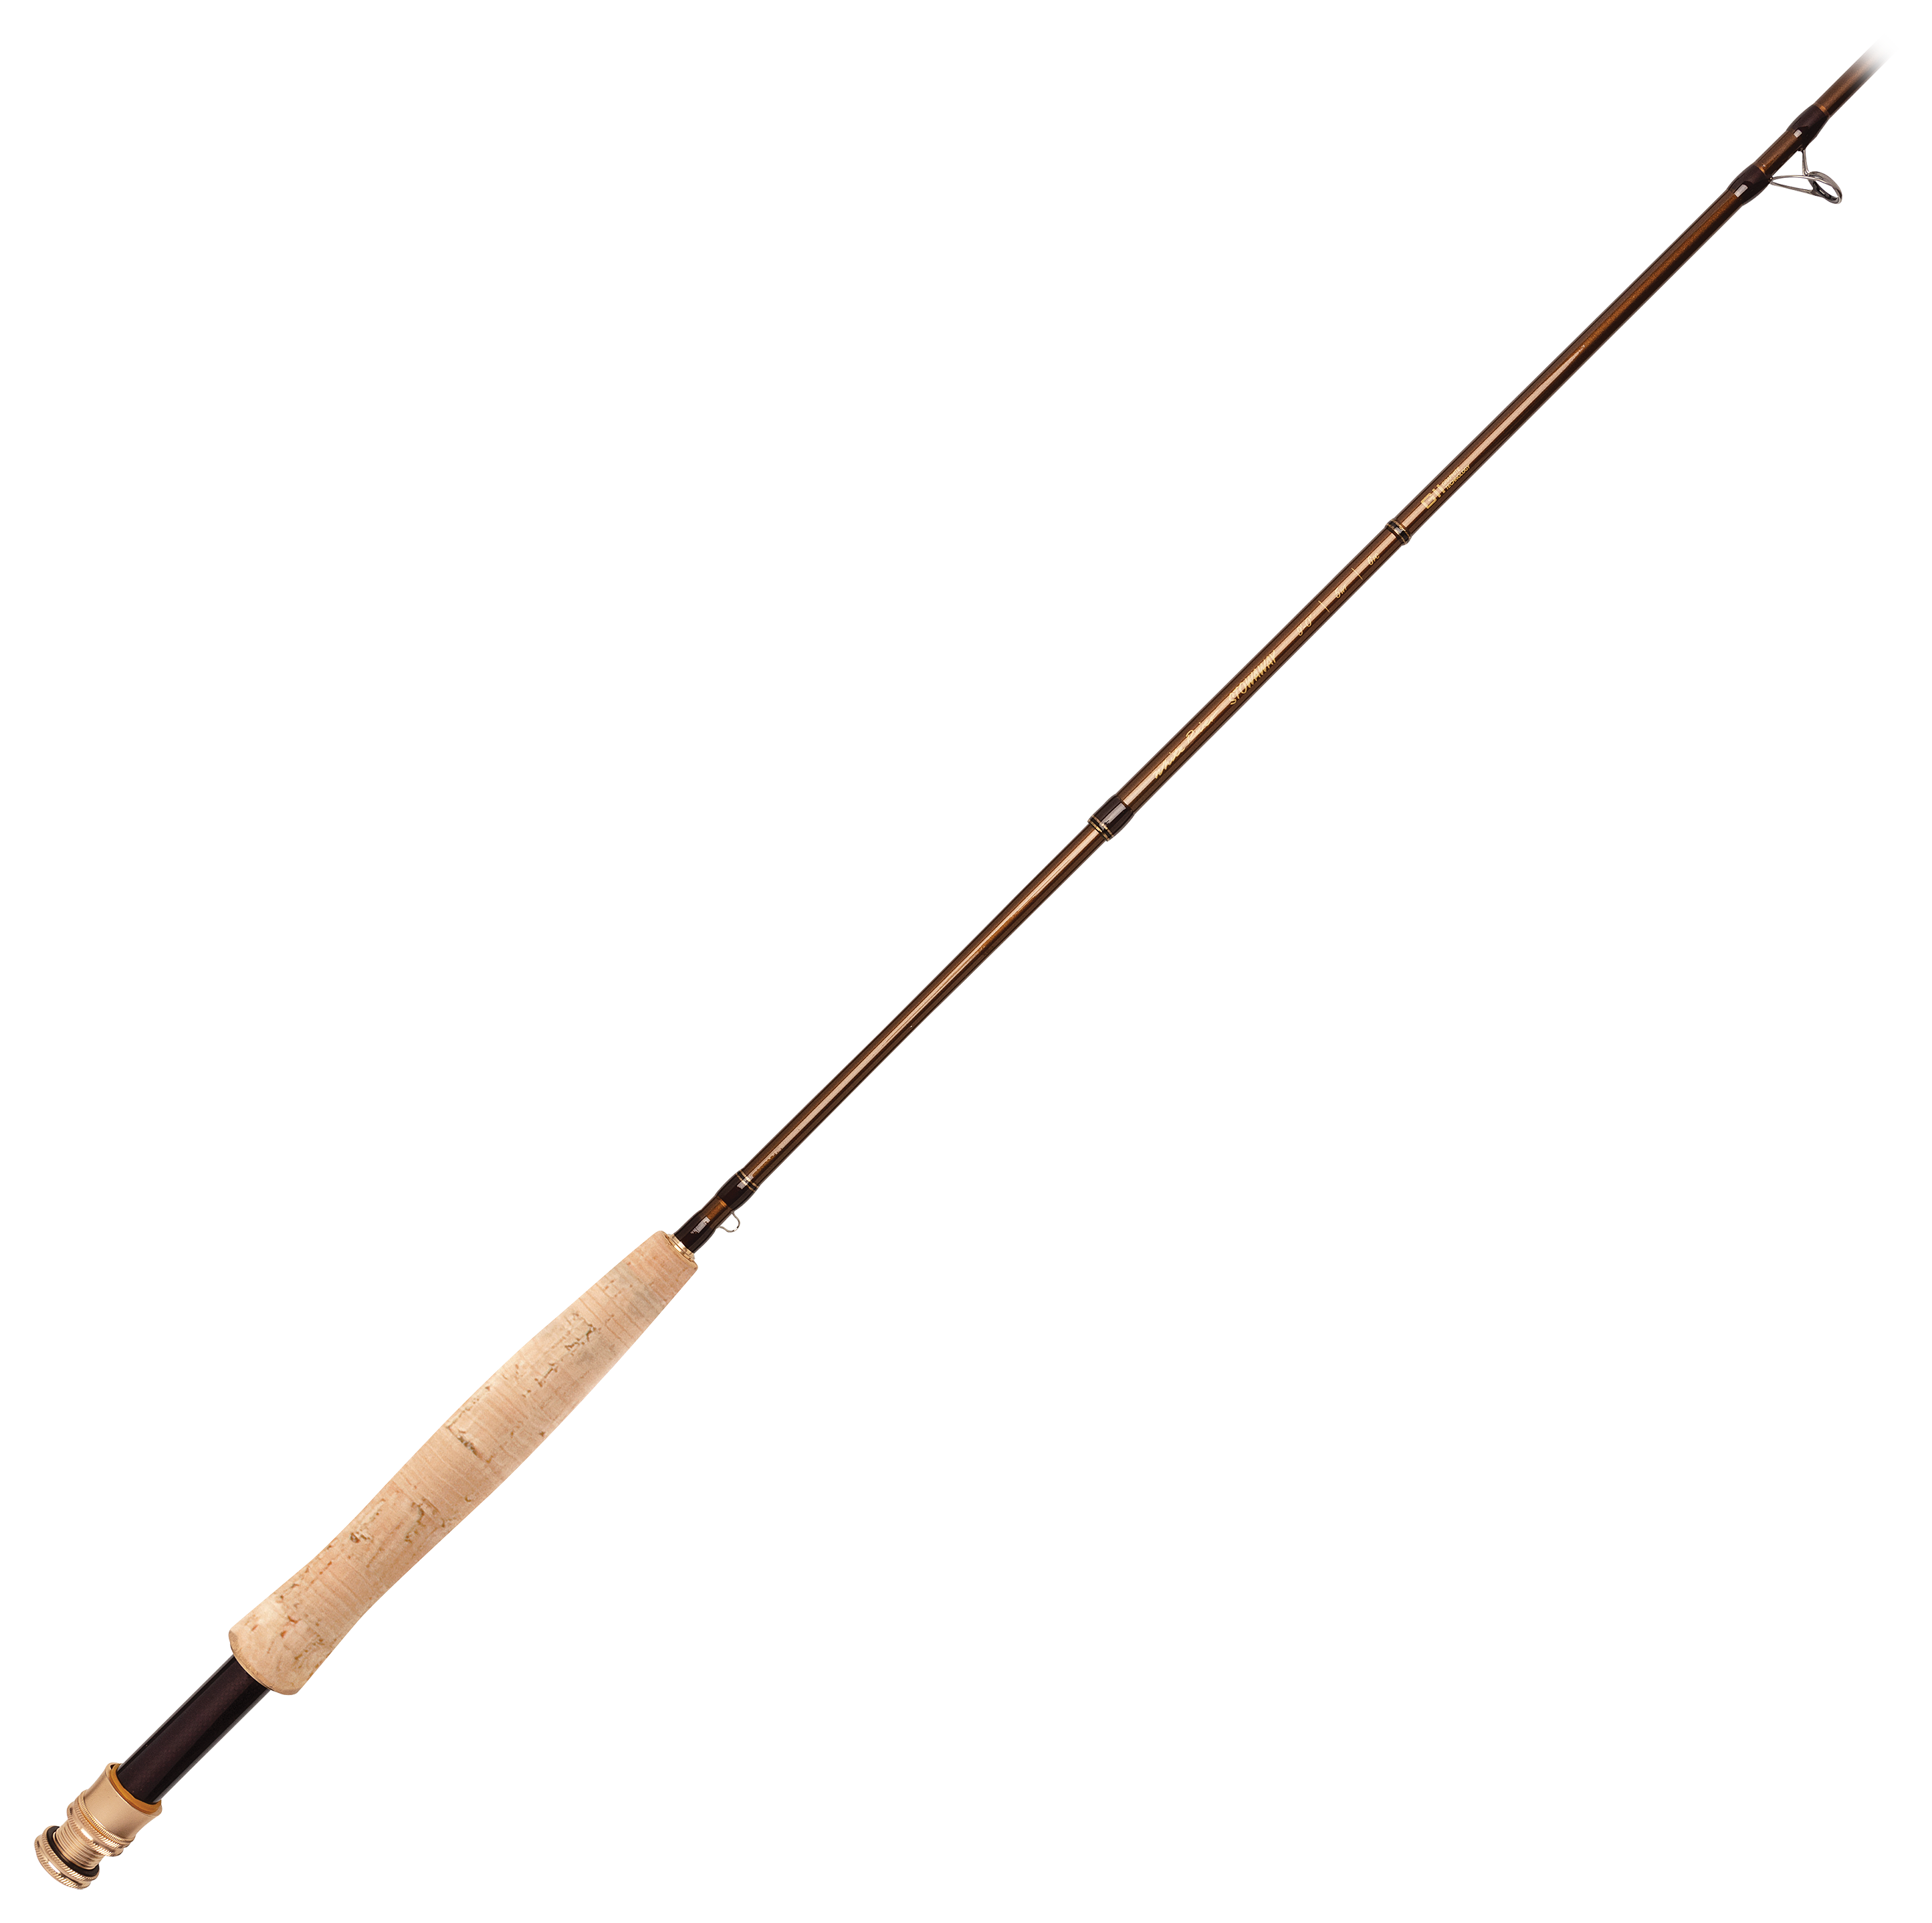 White River Fly Shop Stowaway Fly Rod - WRST906-6